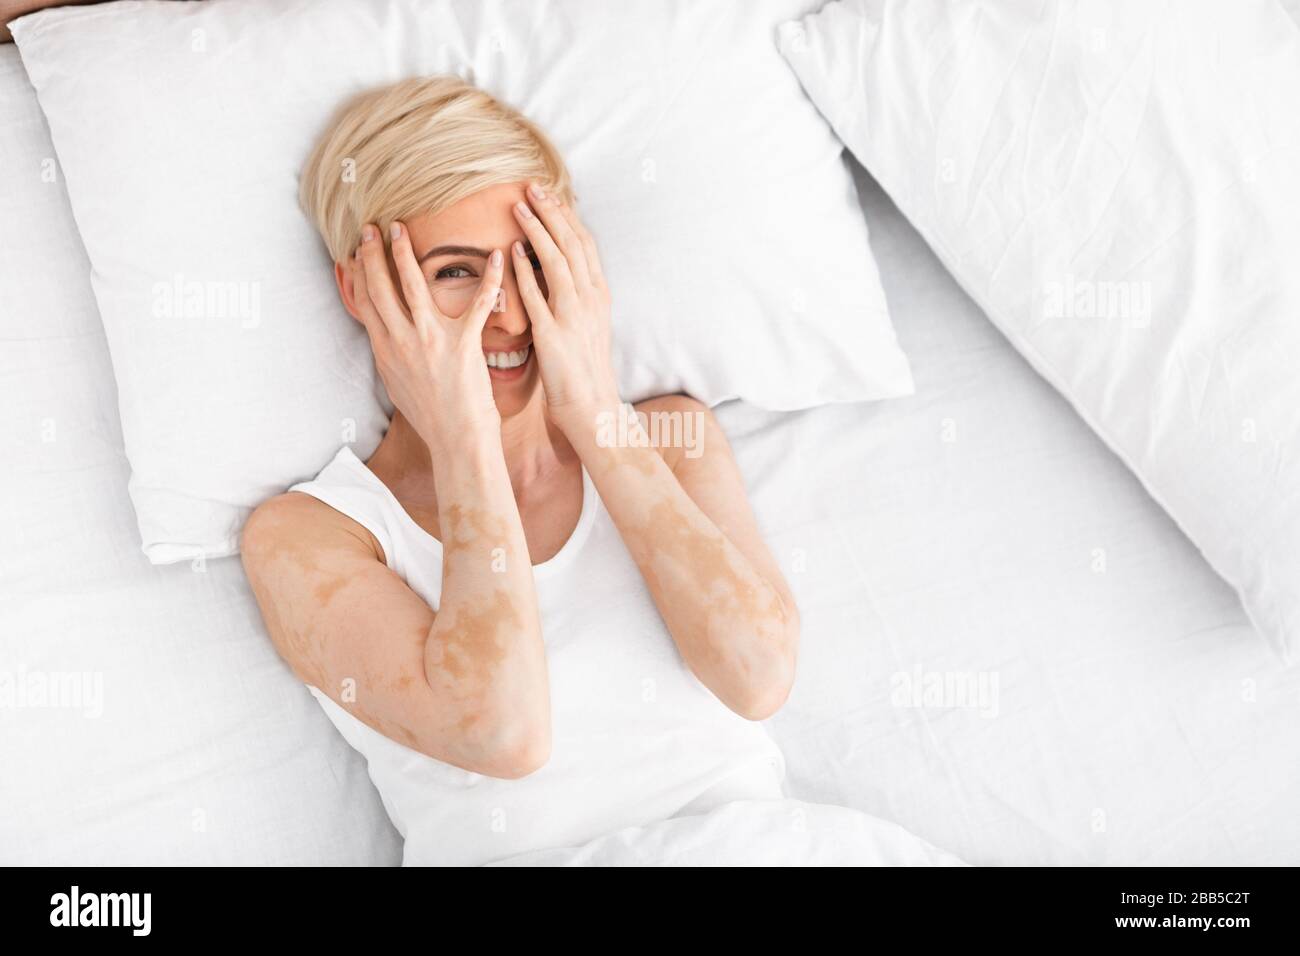 Middle aged woman playfully hiding her eyes behind her hands Stock Photo